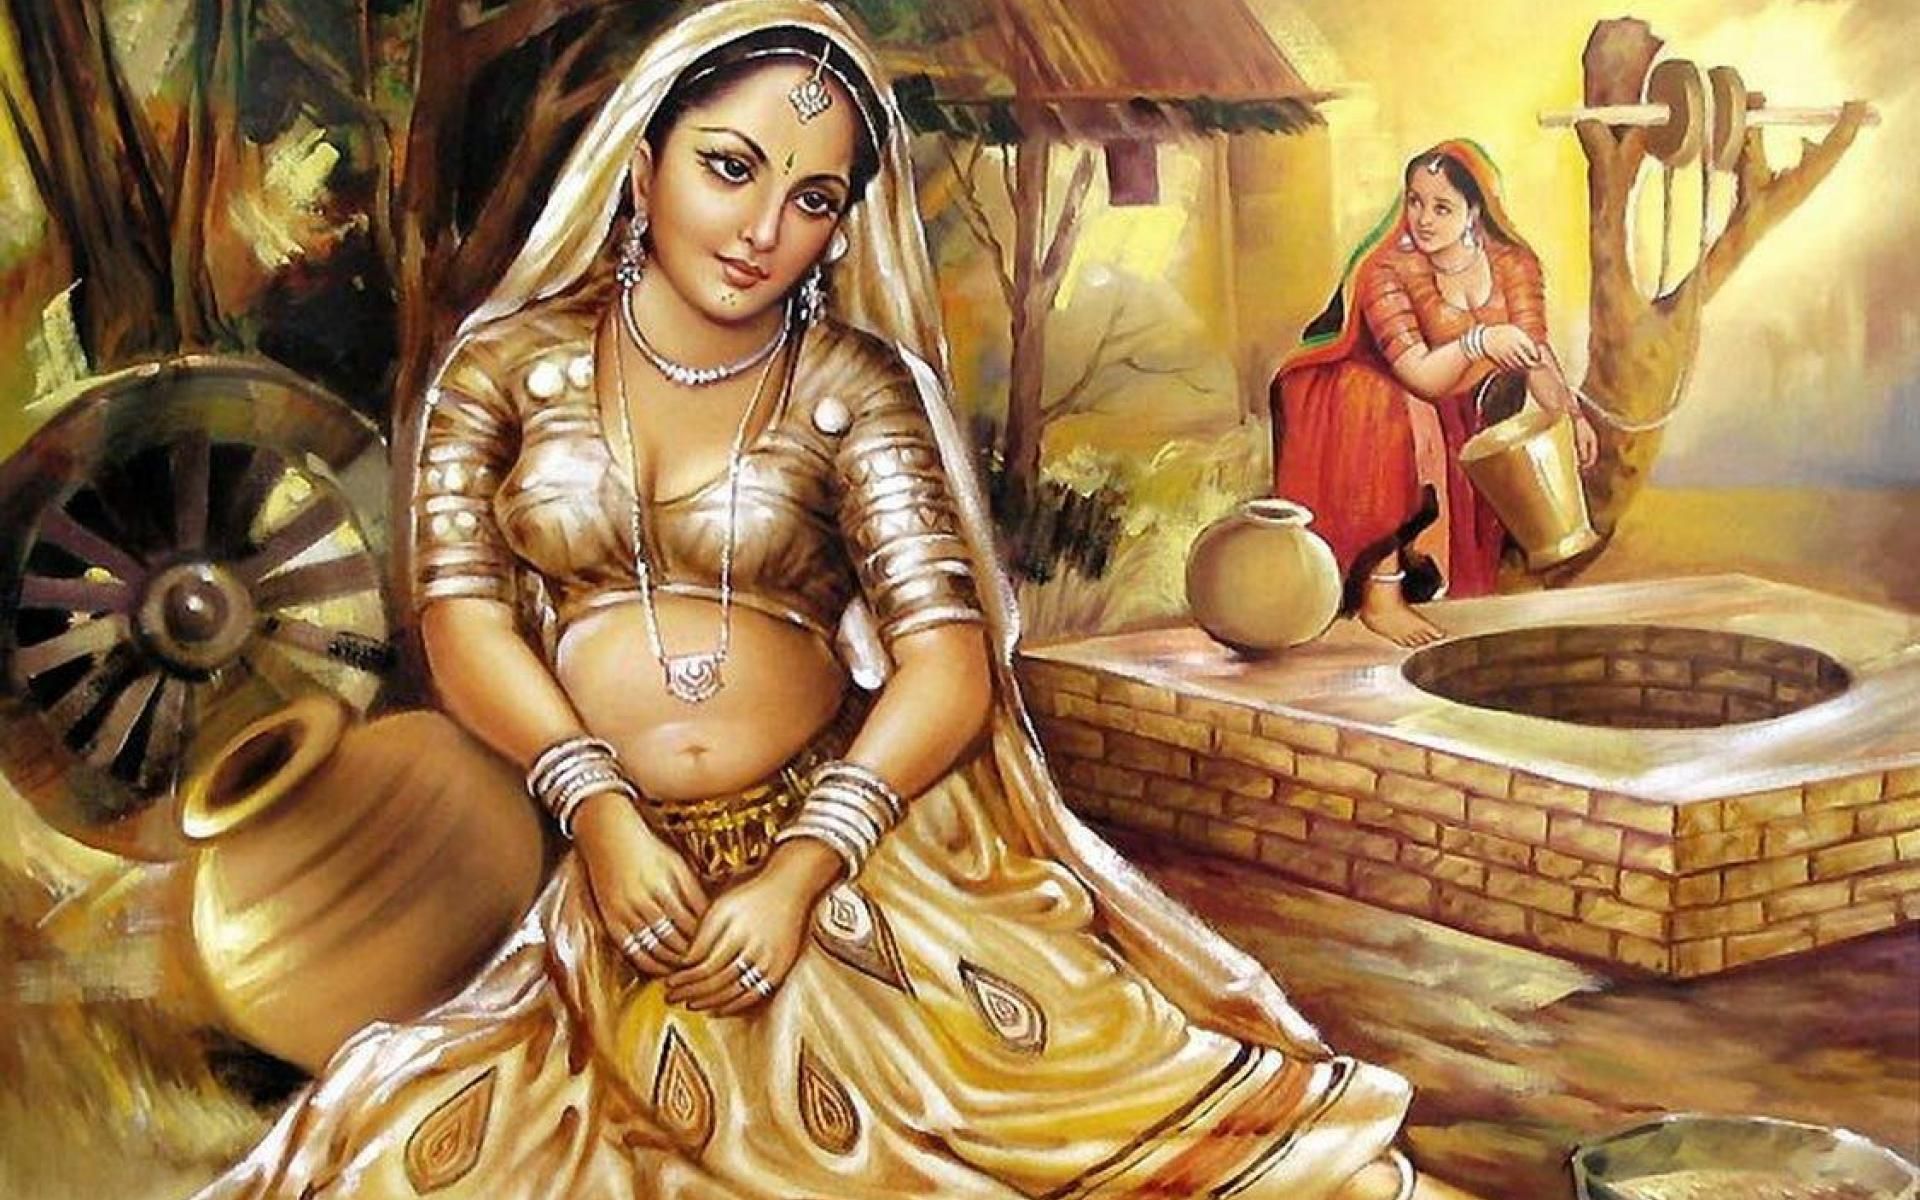 Woman Painting Of Indian Culture HD Wallpaper For Desktop. Indian paintings, Painting of girl, Indian artist